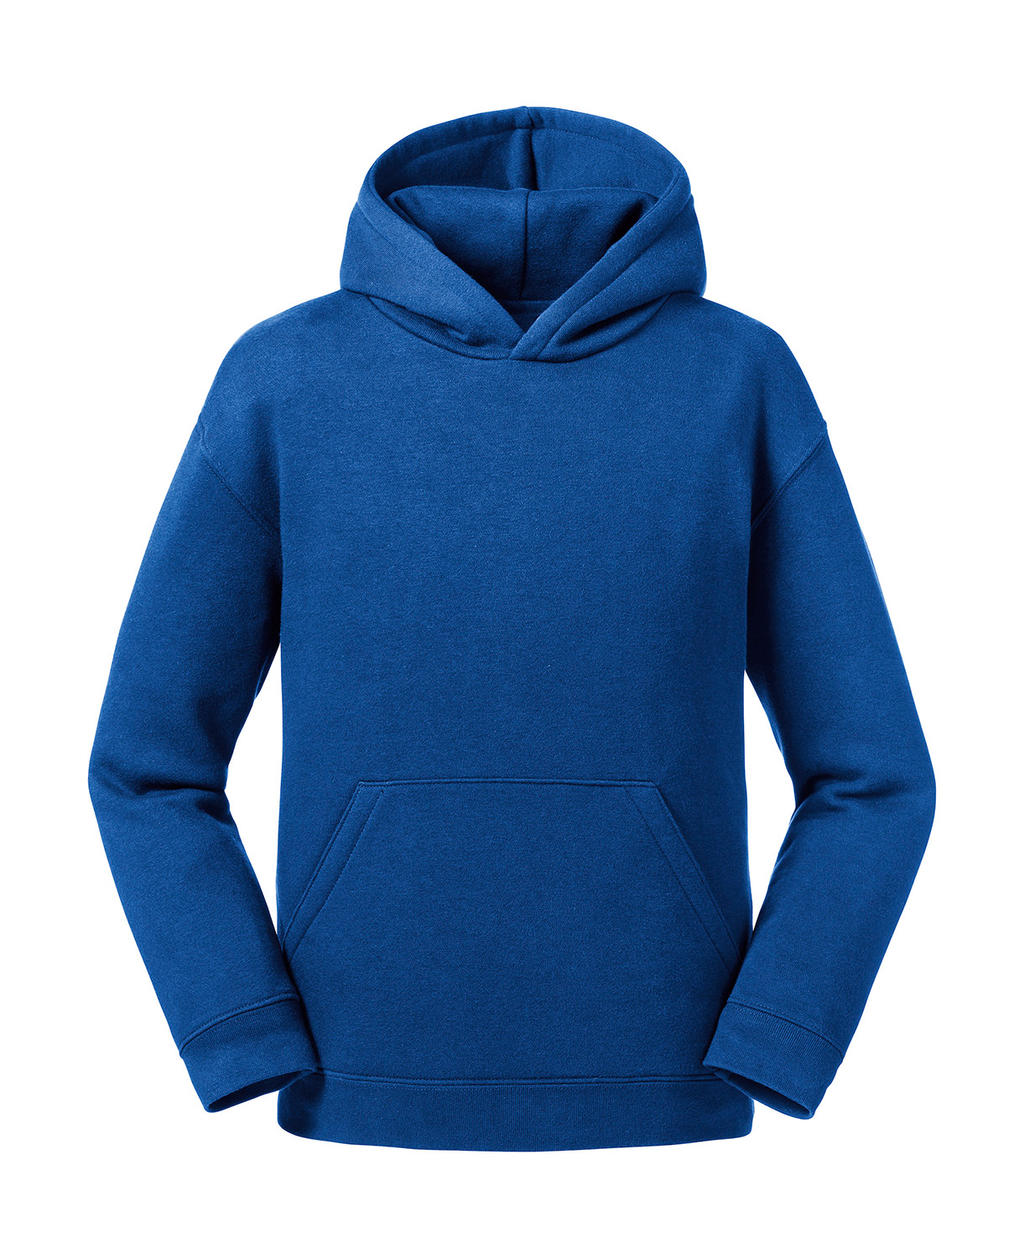  Kids Authentic Hooded Sweat in Farbe Bright Royal